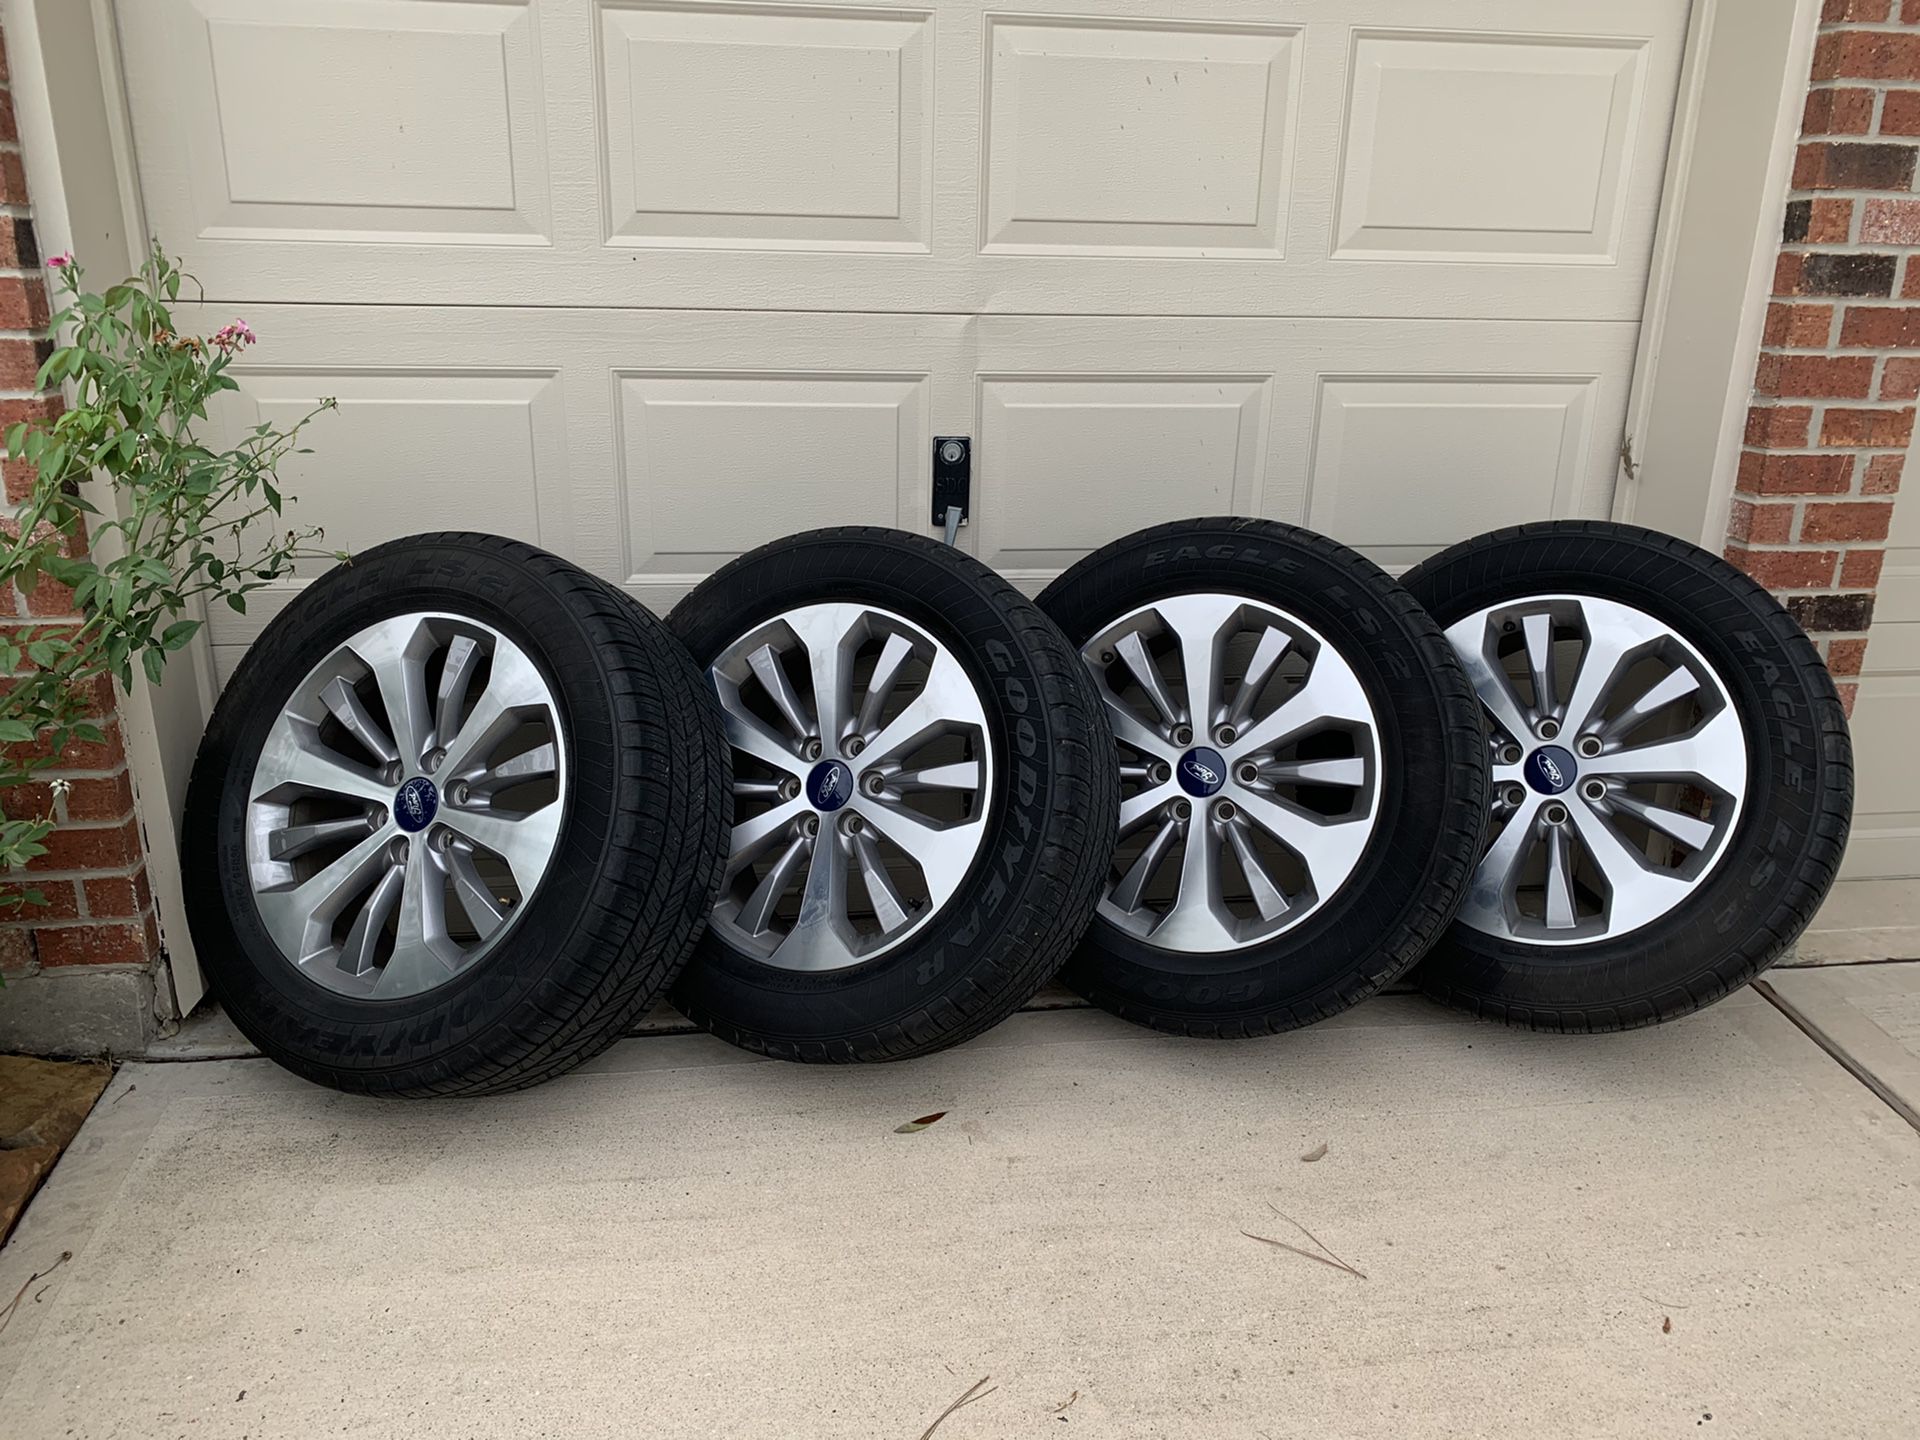 2017 F-150 20 inch factory rims - 275/55R20 Goodyear tires